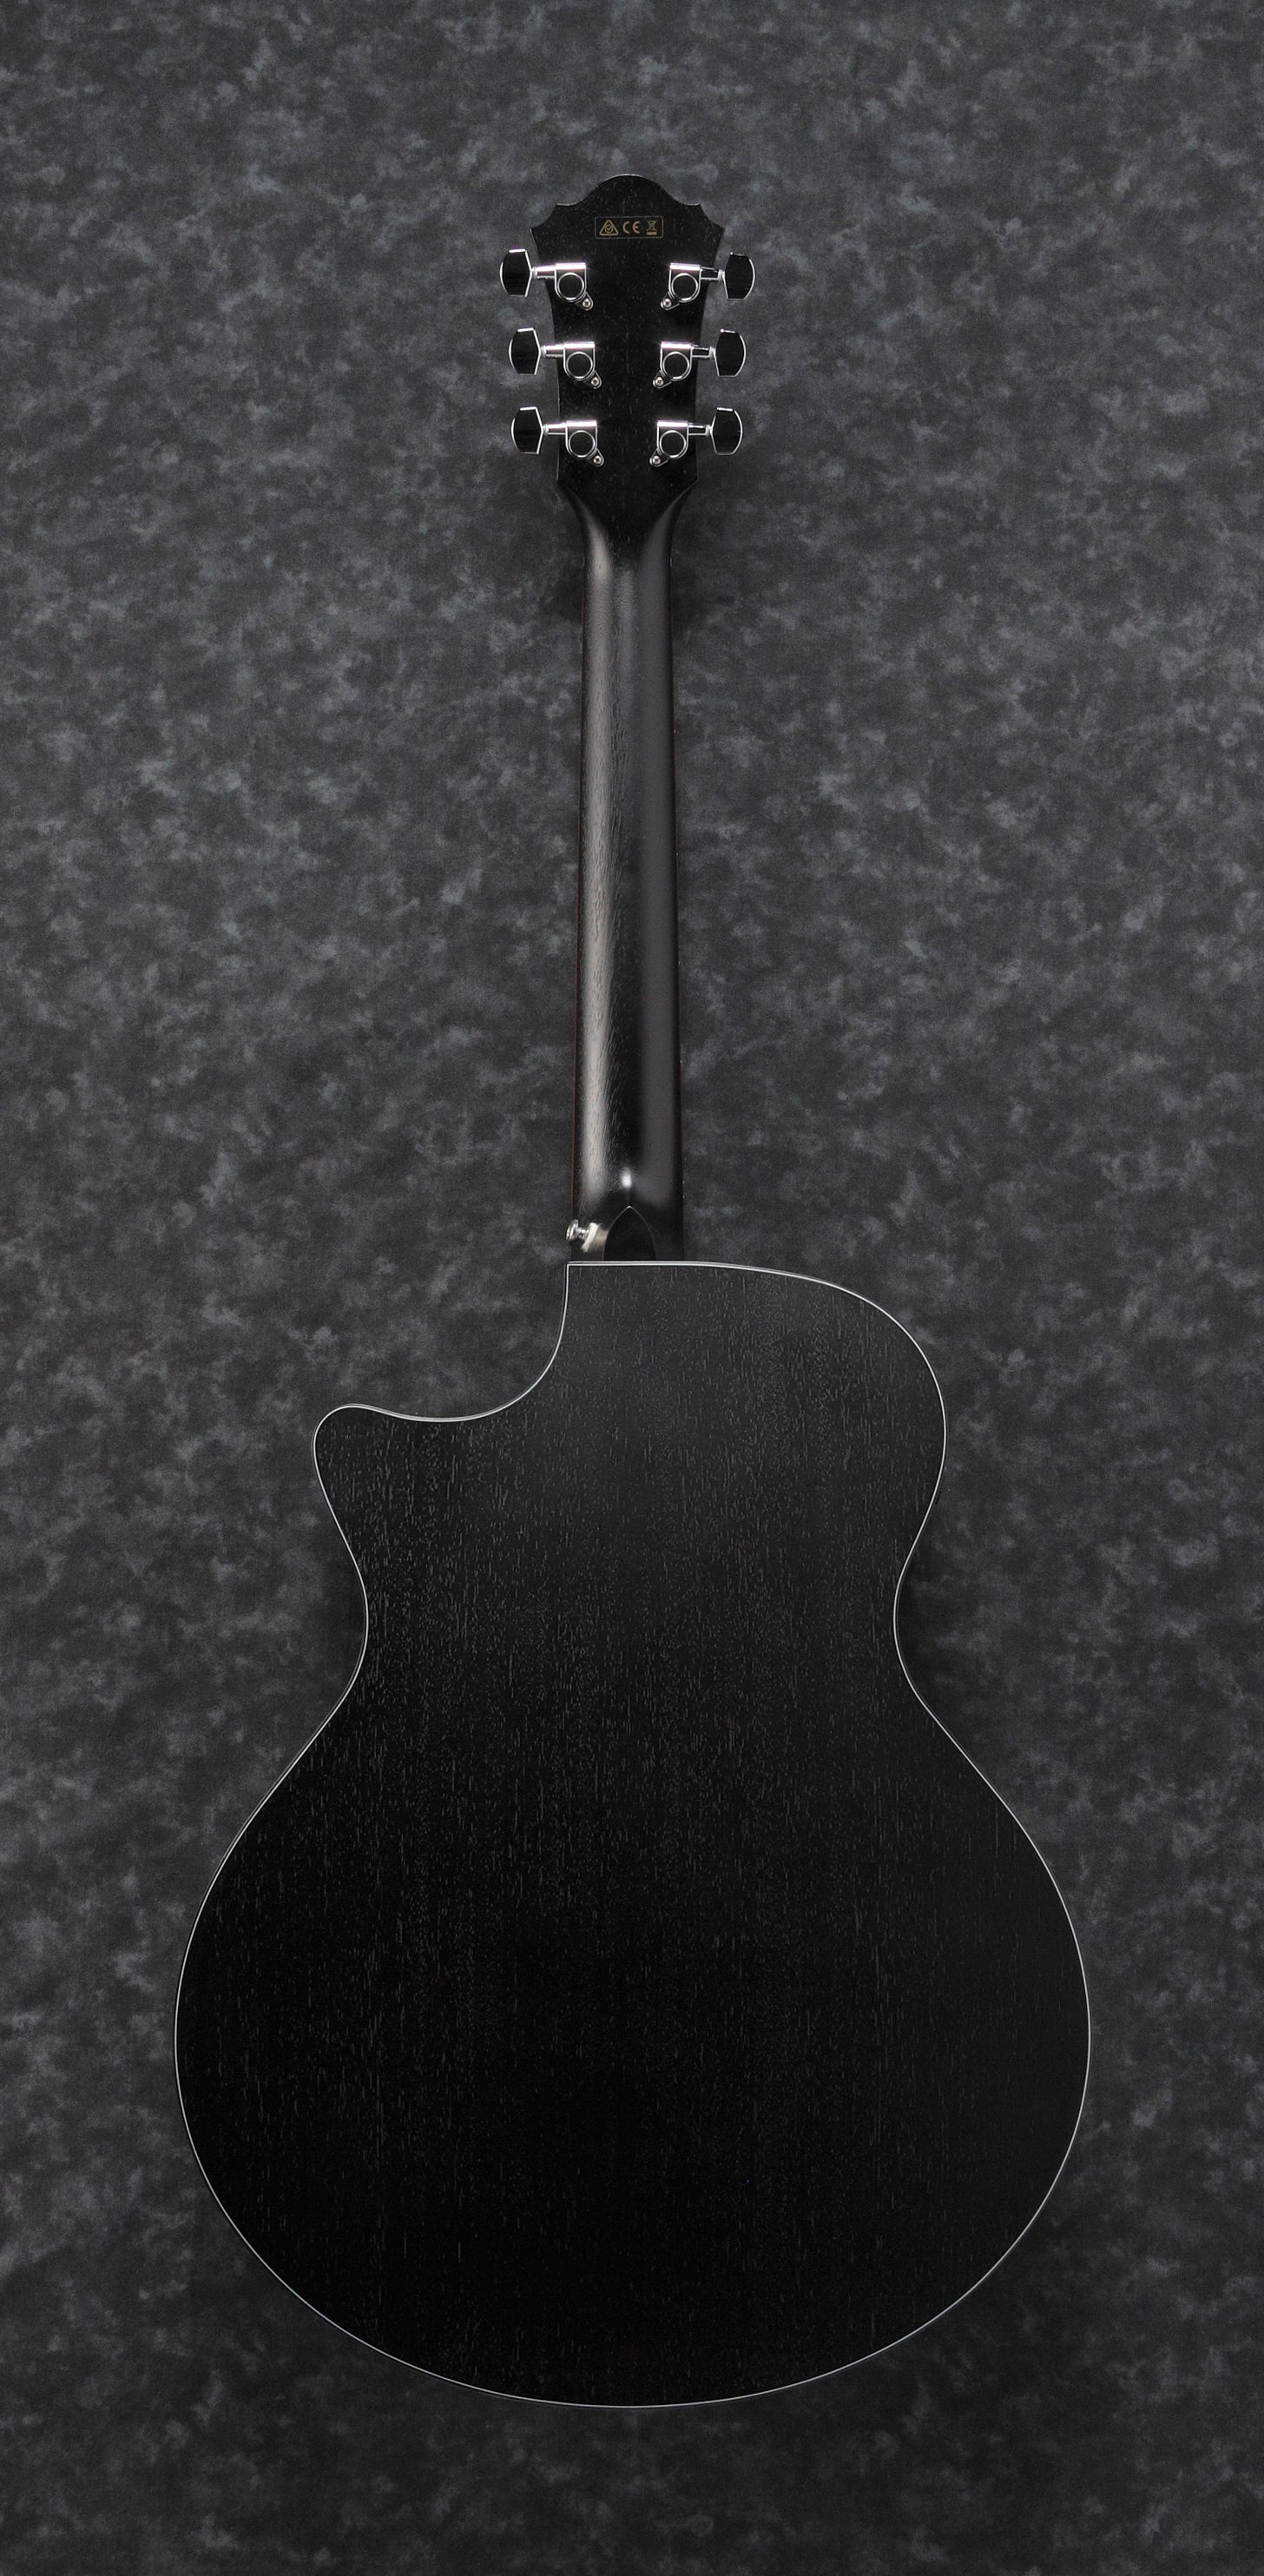 Ibanez AE295 Acoustic Guitar - Weathered Black Open Pore木結他